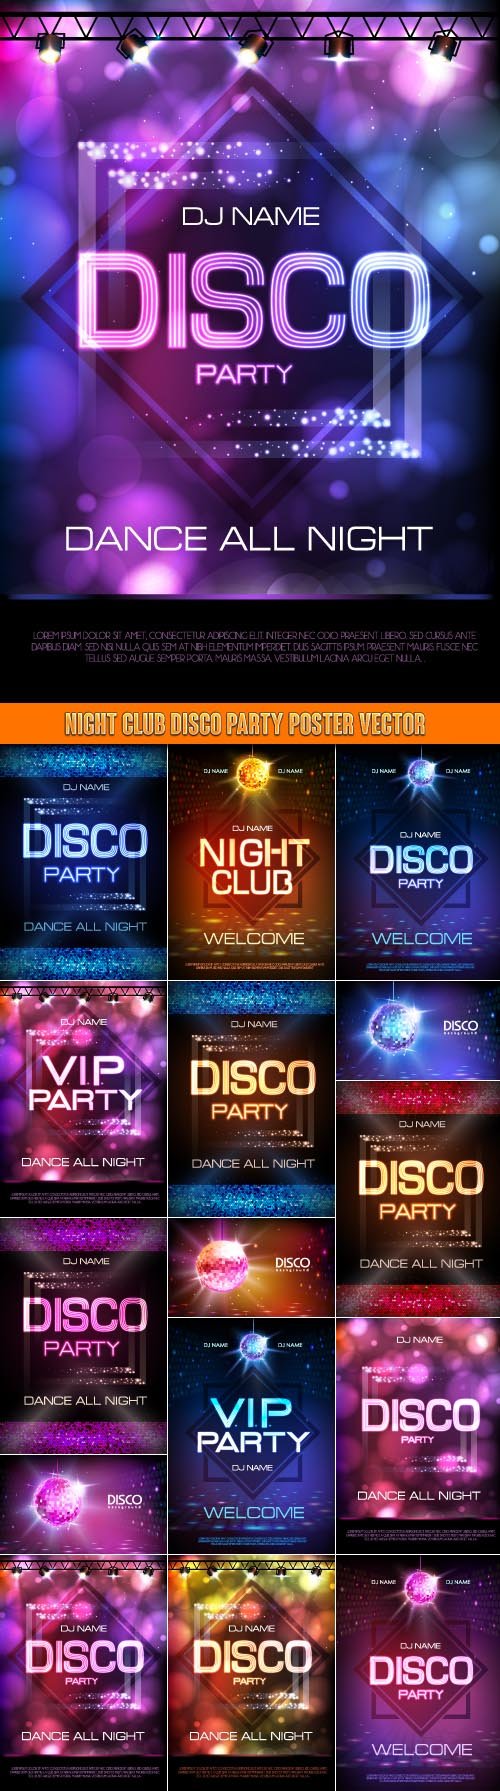 Night Club Disco Party Poster Vector